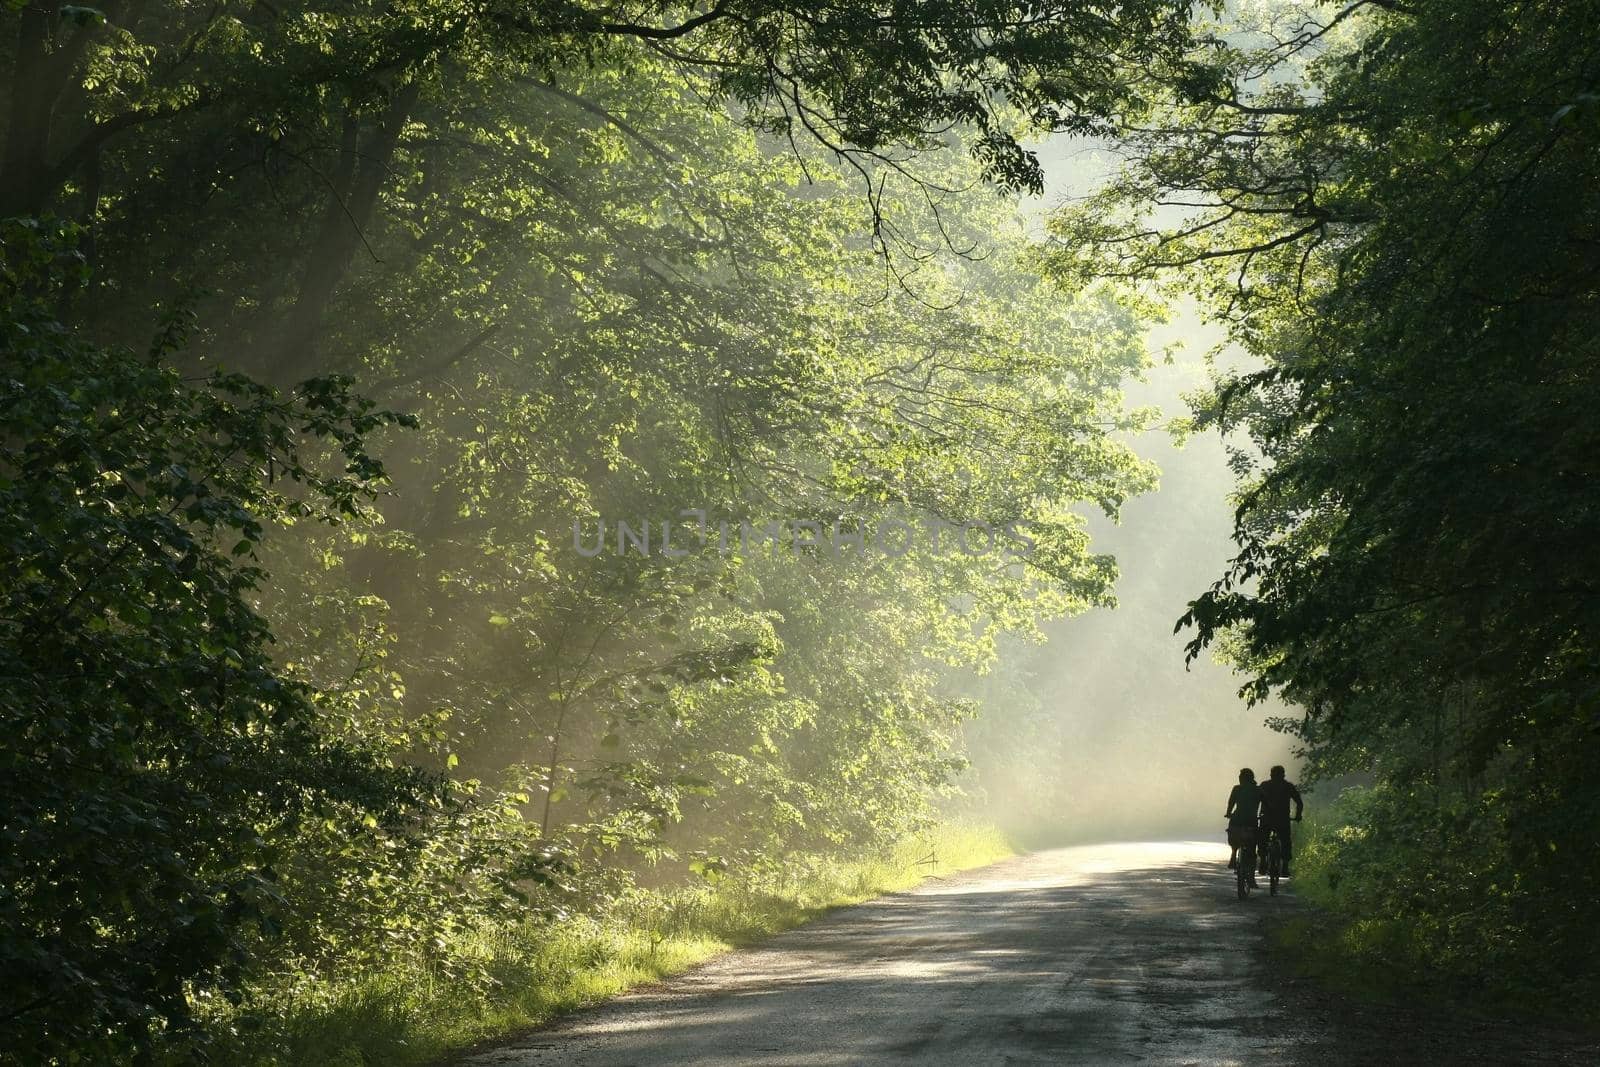 Cyclists ride a country road through the spring forest after rainfall